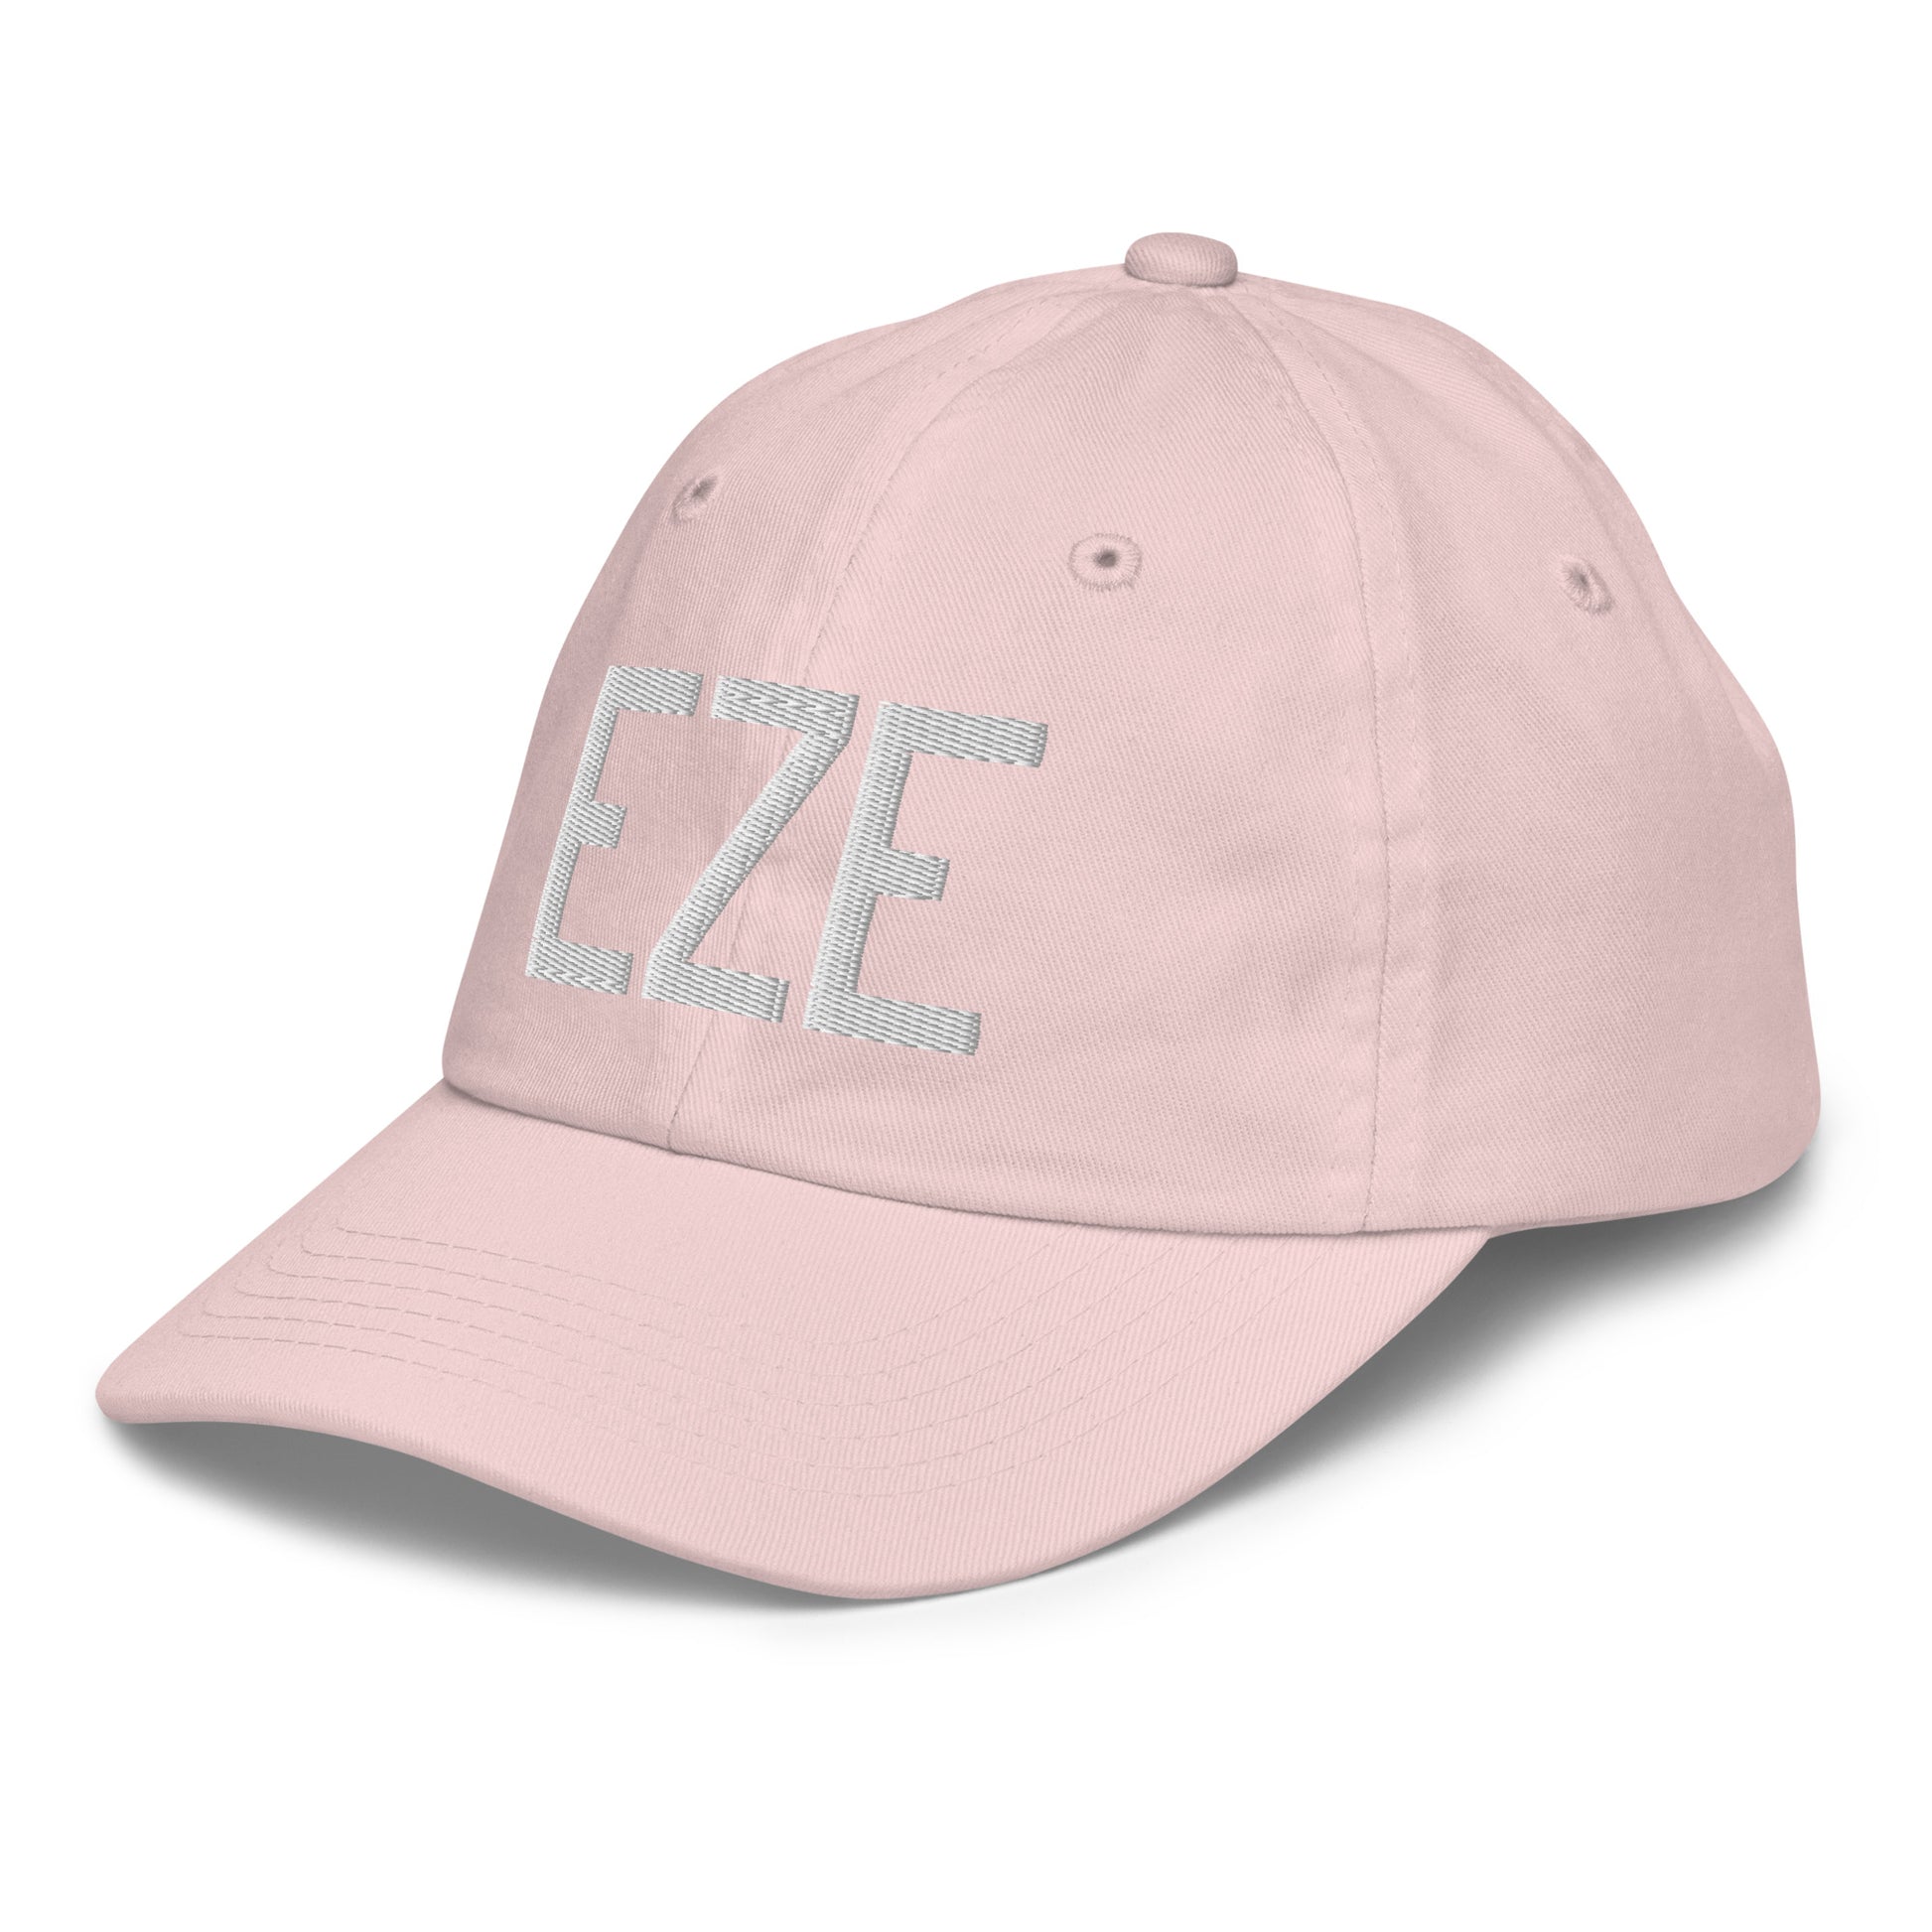 Airport Code Kid's Baseball Cap - White • EZE Buenos Aires • YHM Designs - Image 33